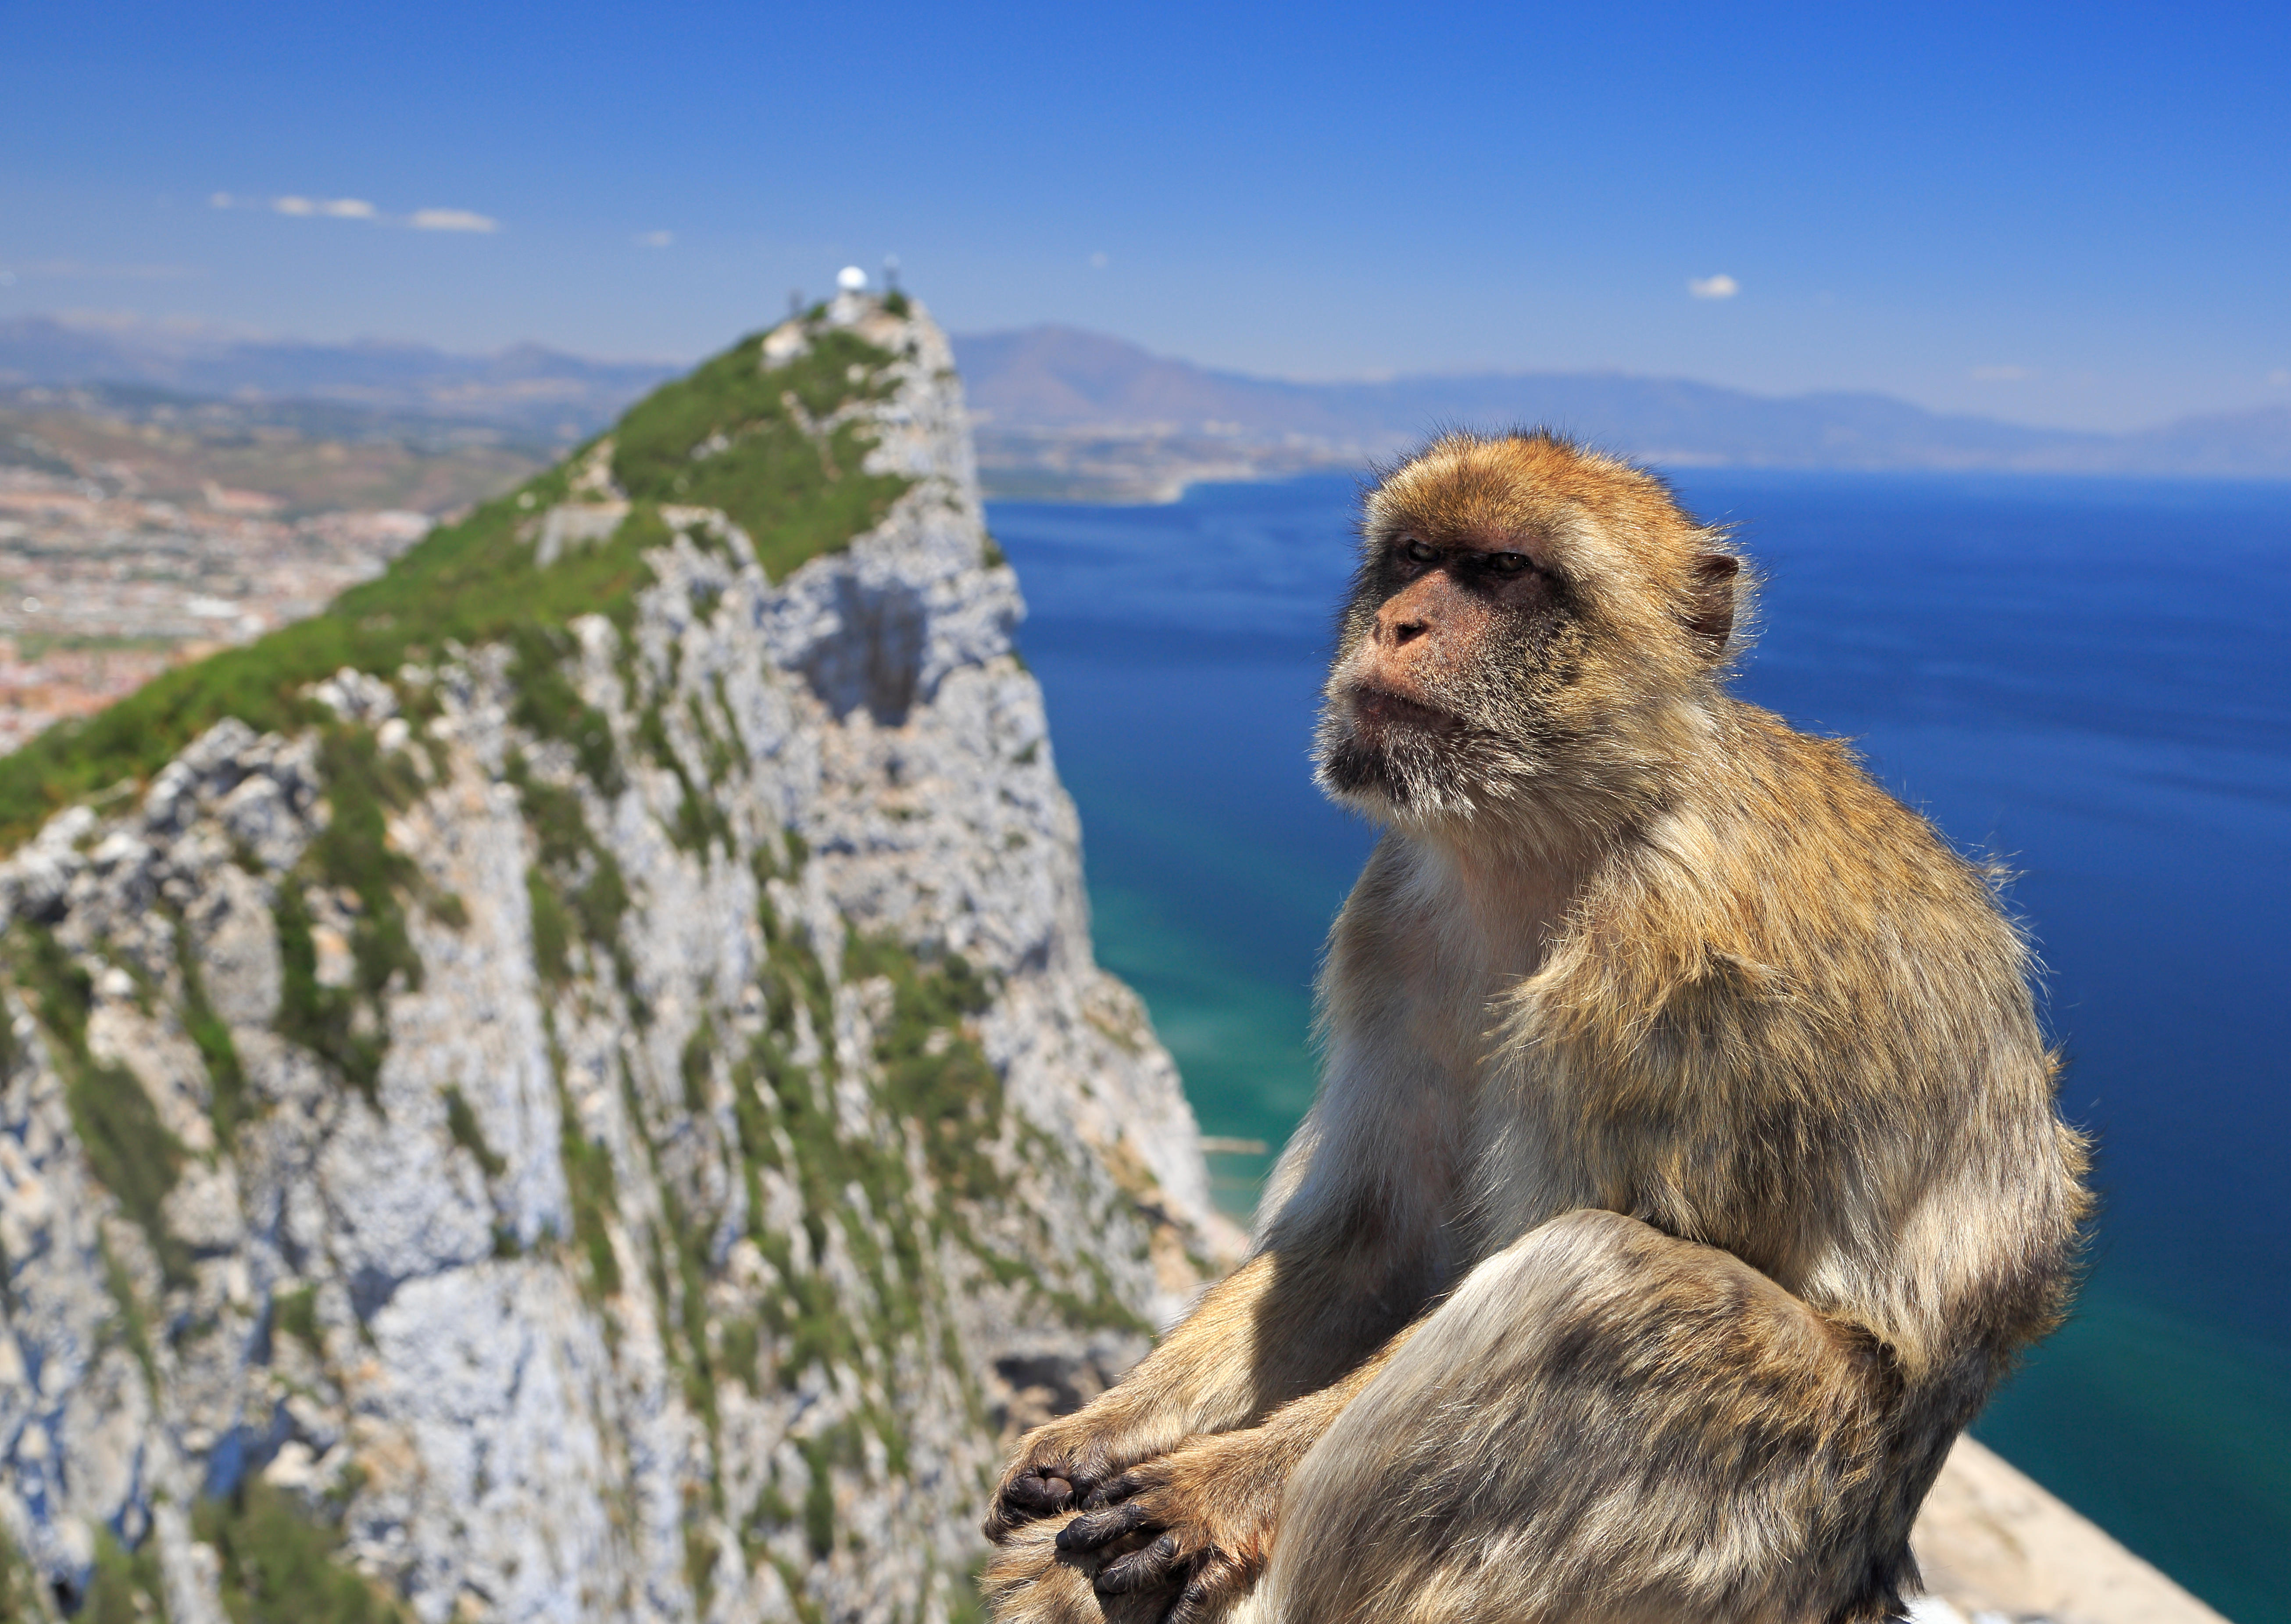 A Barbary macaque on top of the Rock of Gibraltar